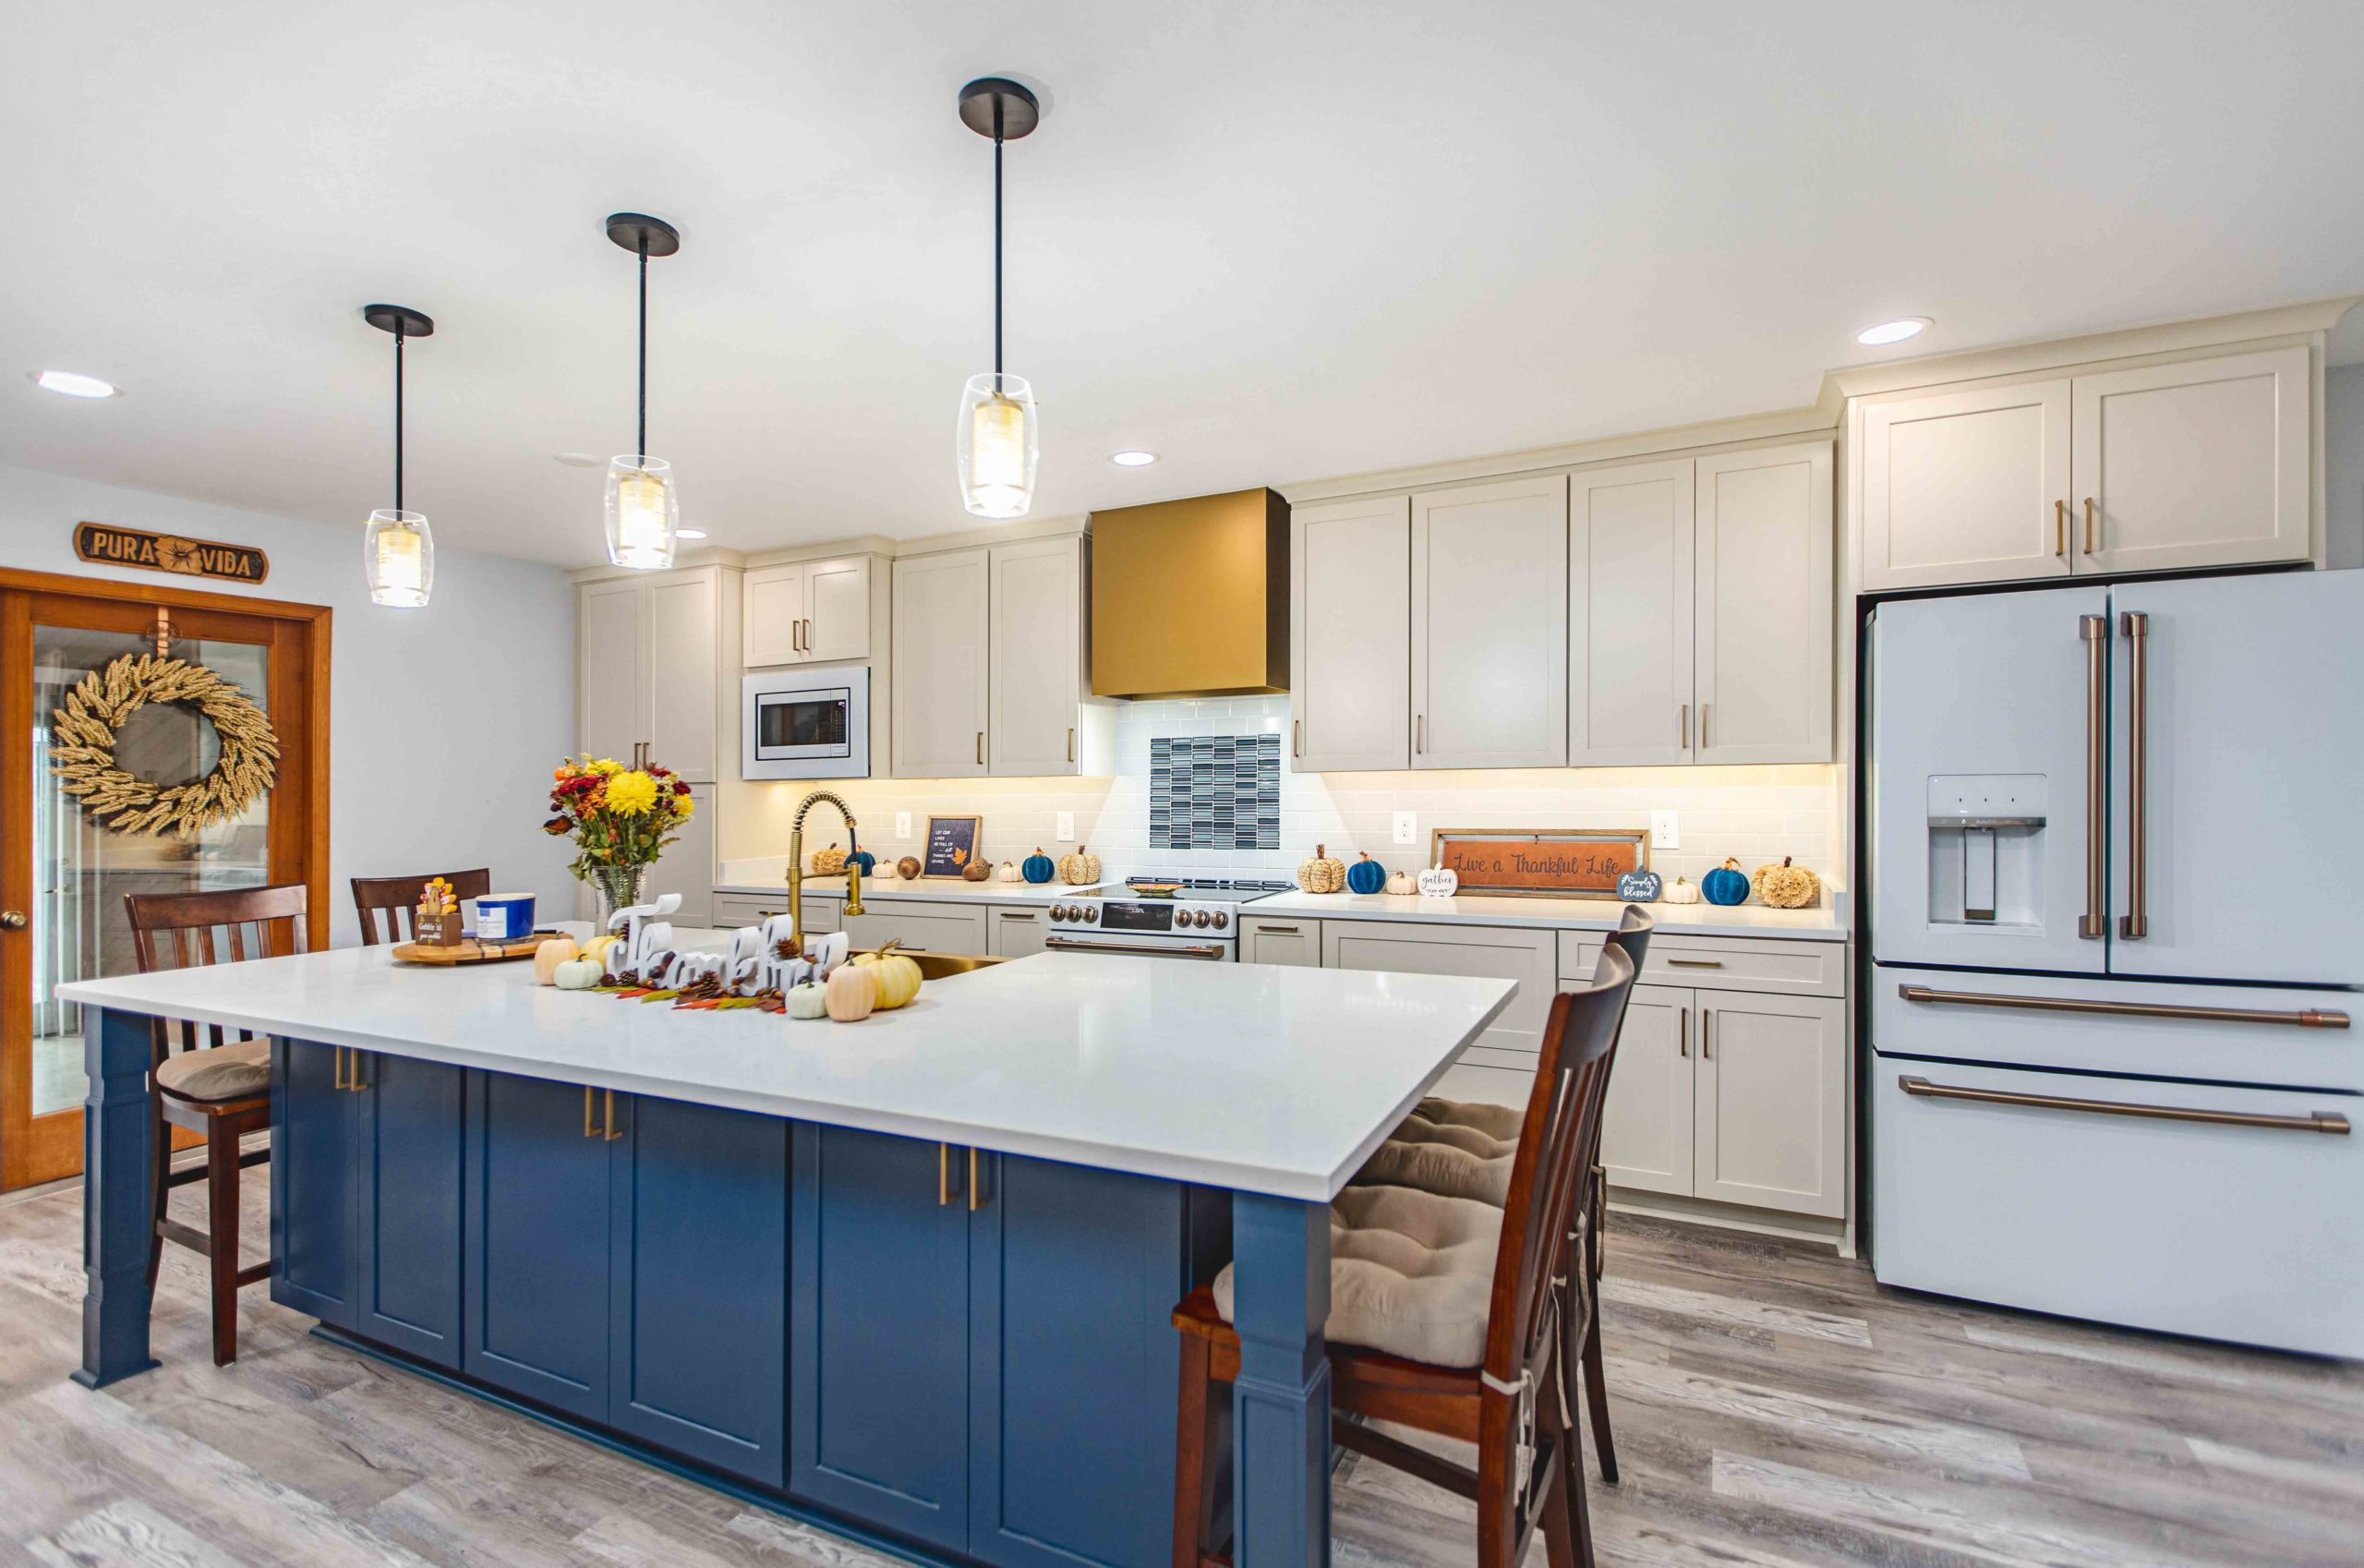 How Much Does a Kitchen Remodel Increase Home Value?